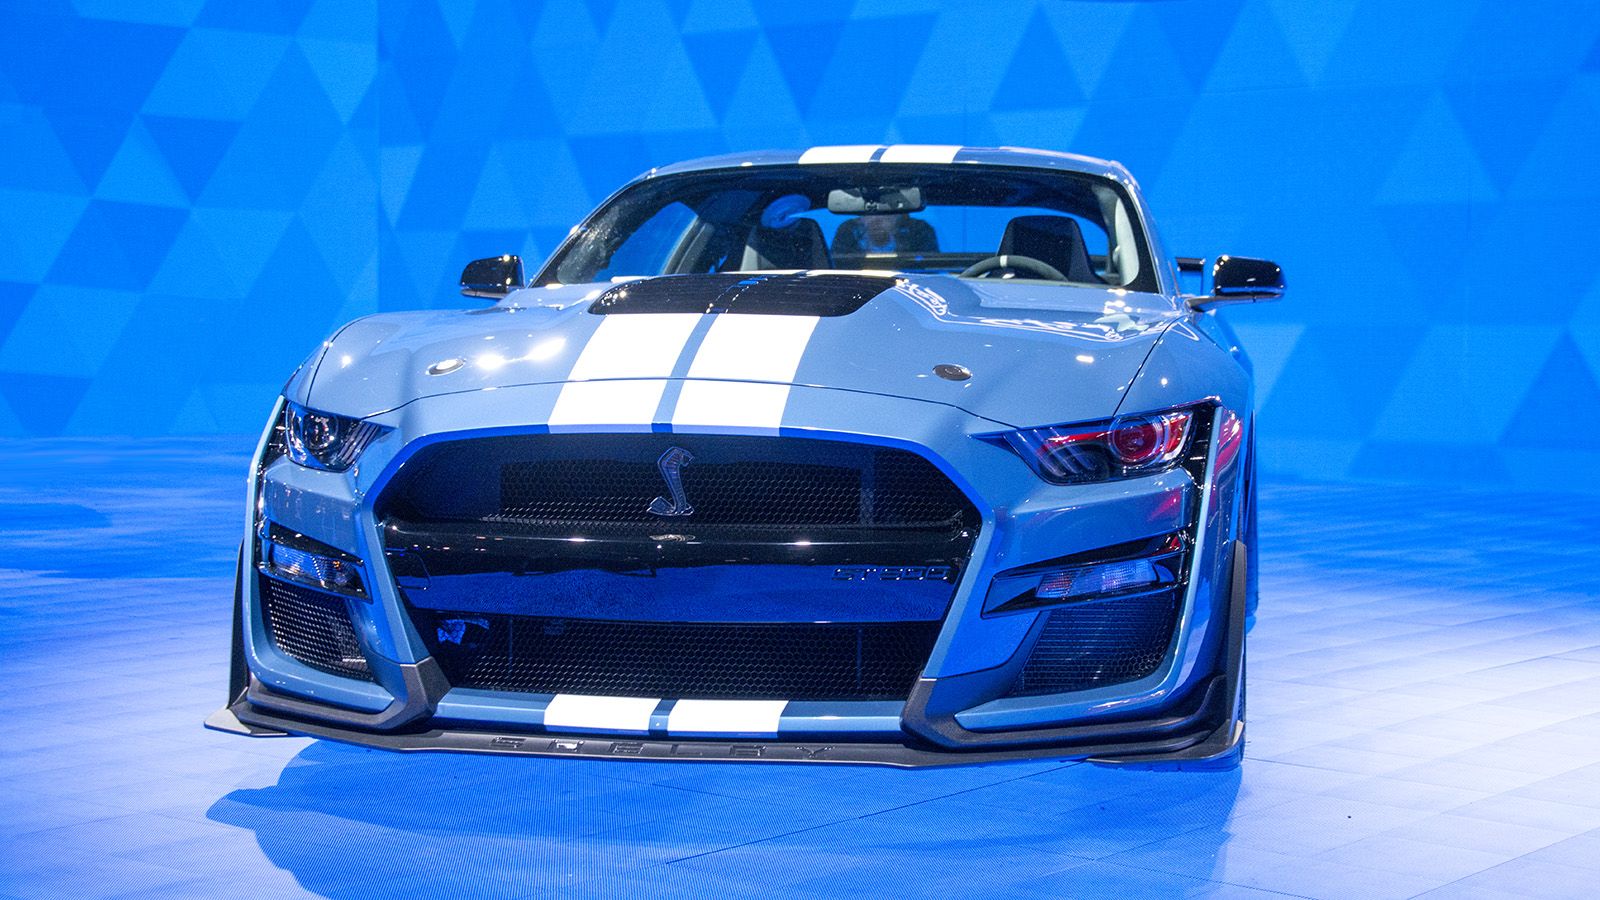 2020 Ford Mustang Shelby GT500: Your 700-plus hp track-devouring